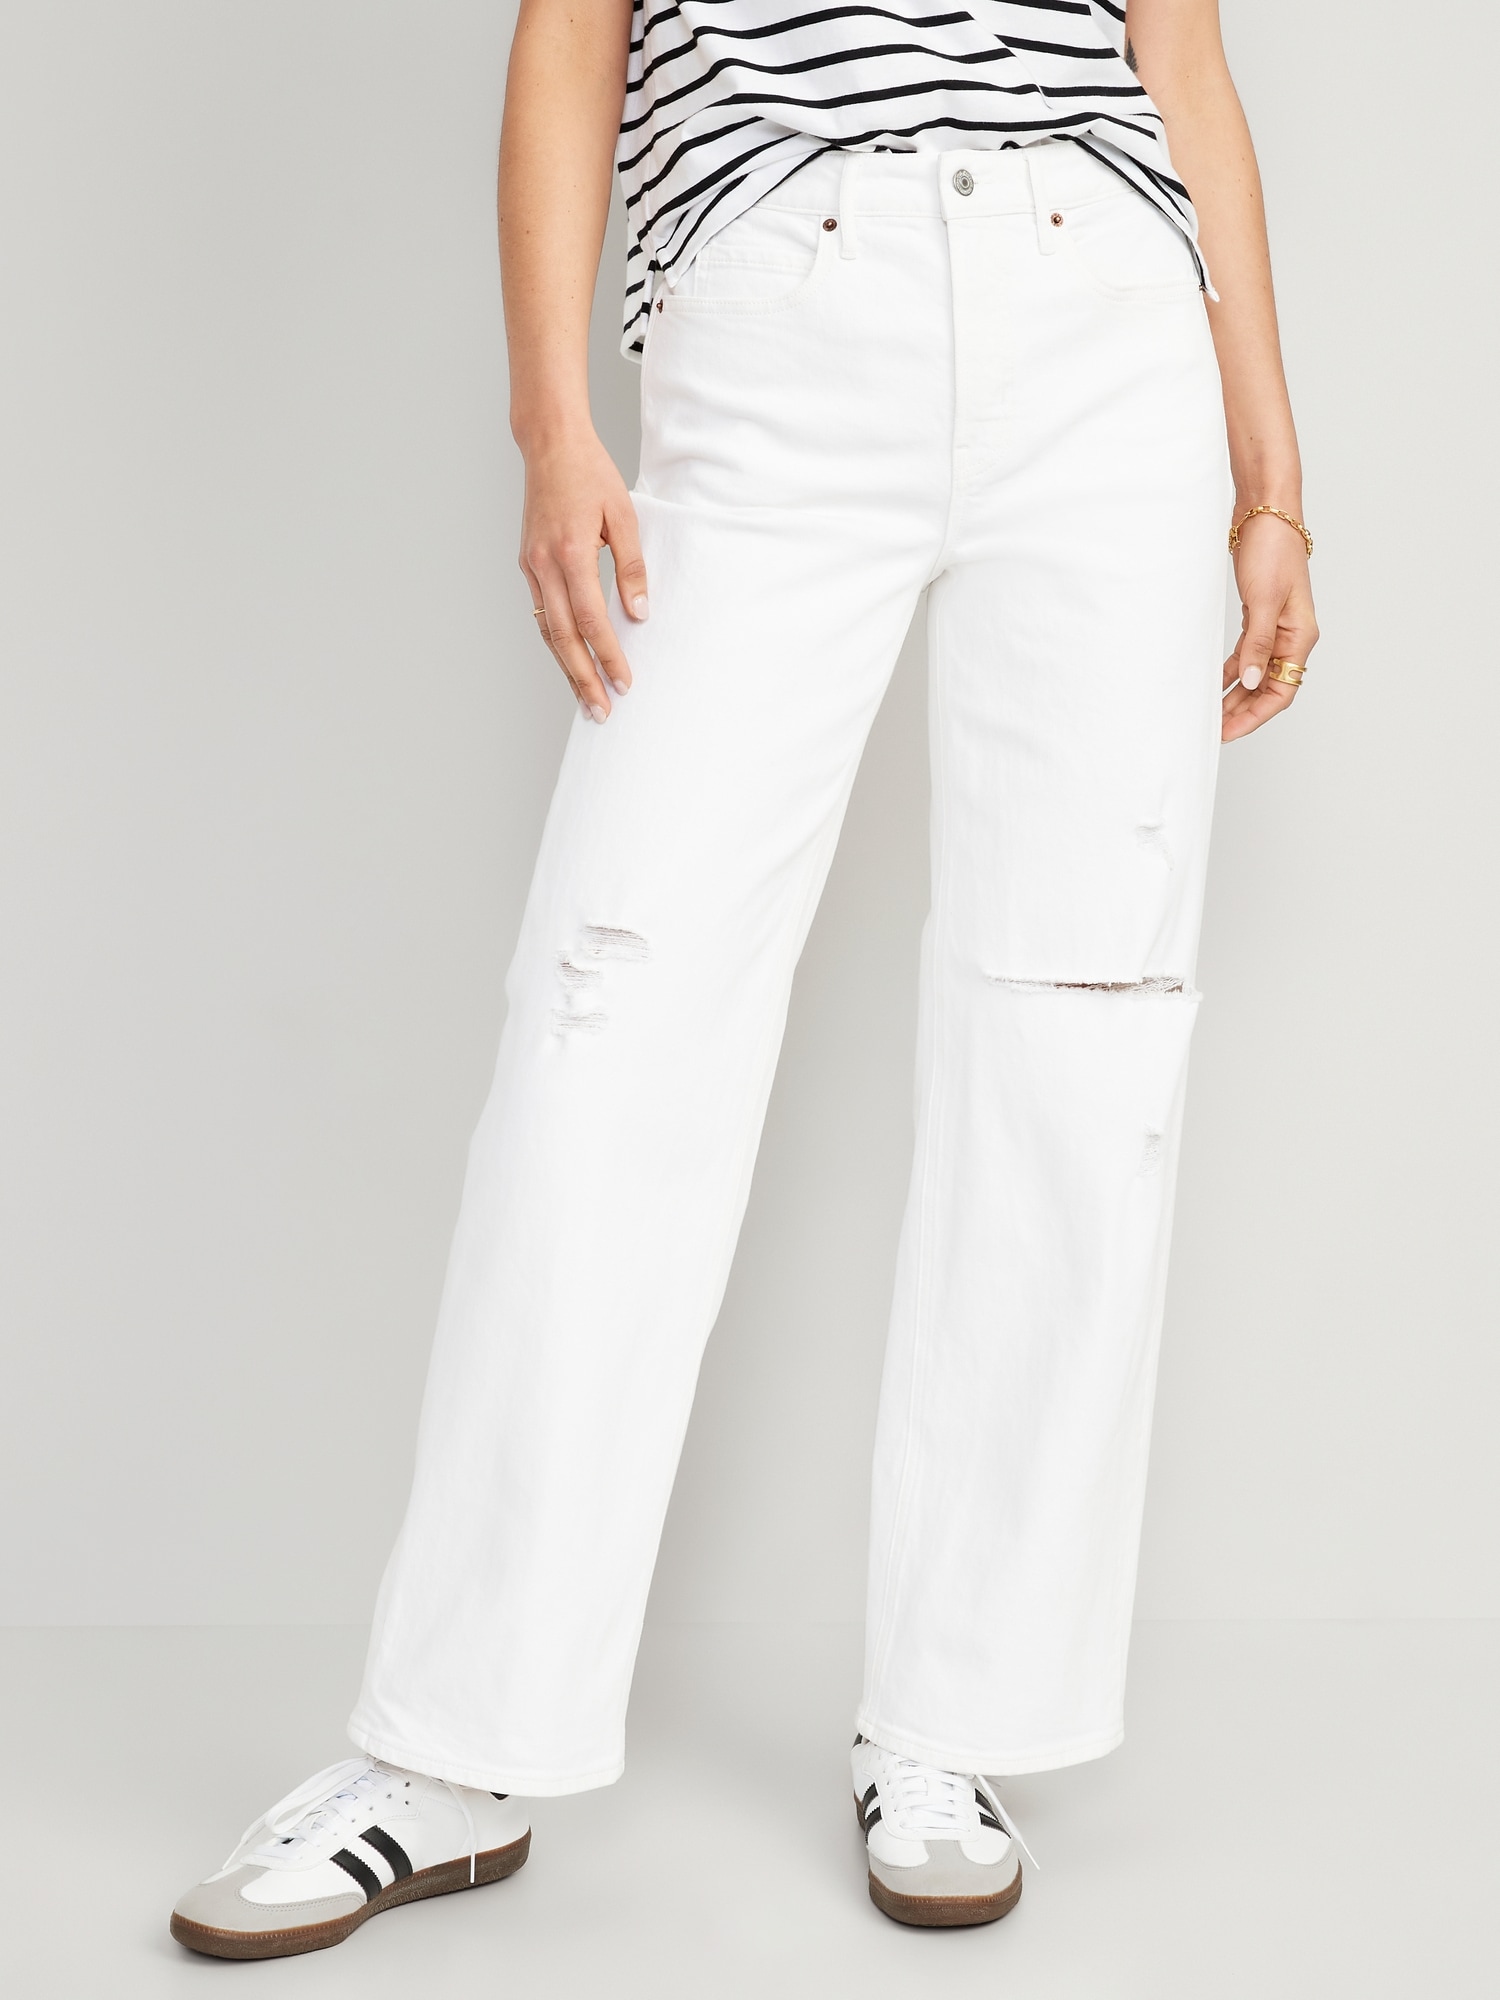 Problemer Ekspression is Extra High-Waisted Wide Leg Cut-Off White Jeans for Women | Old Navy